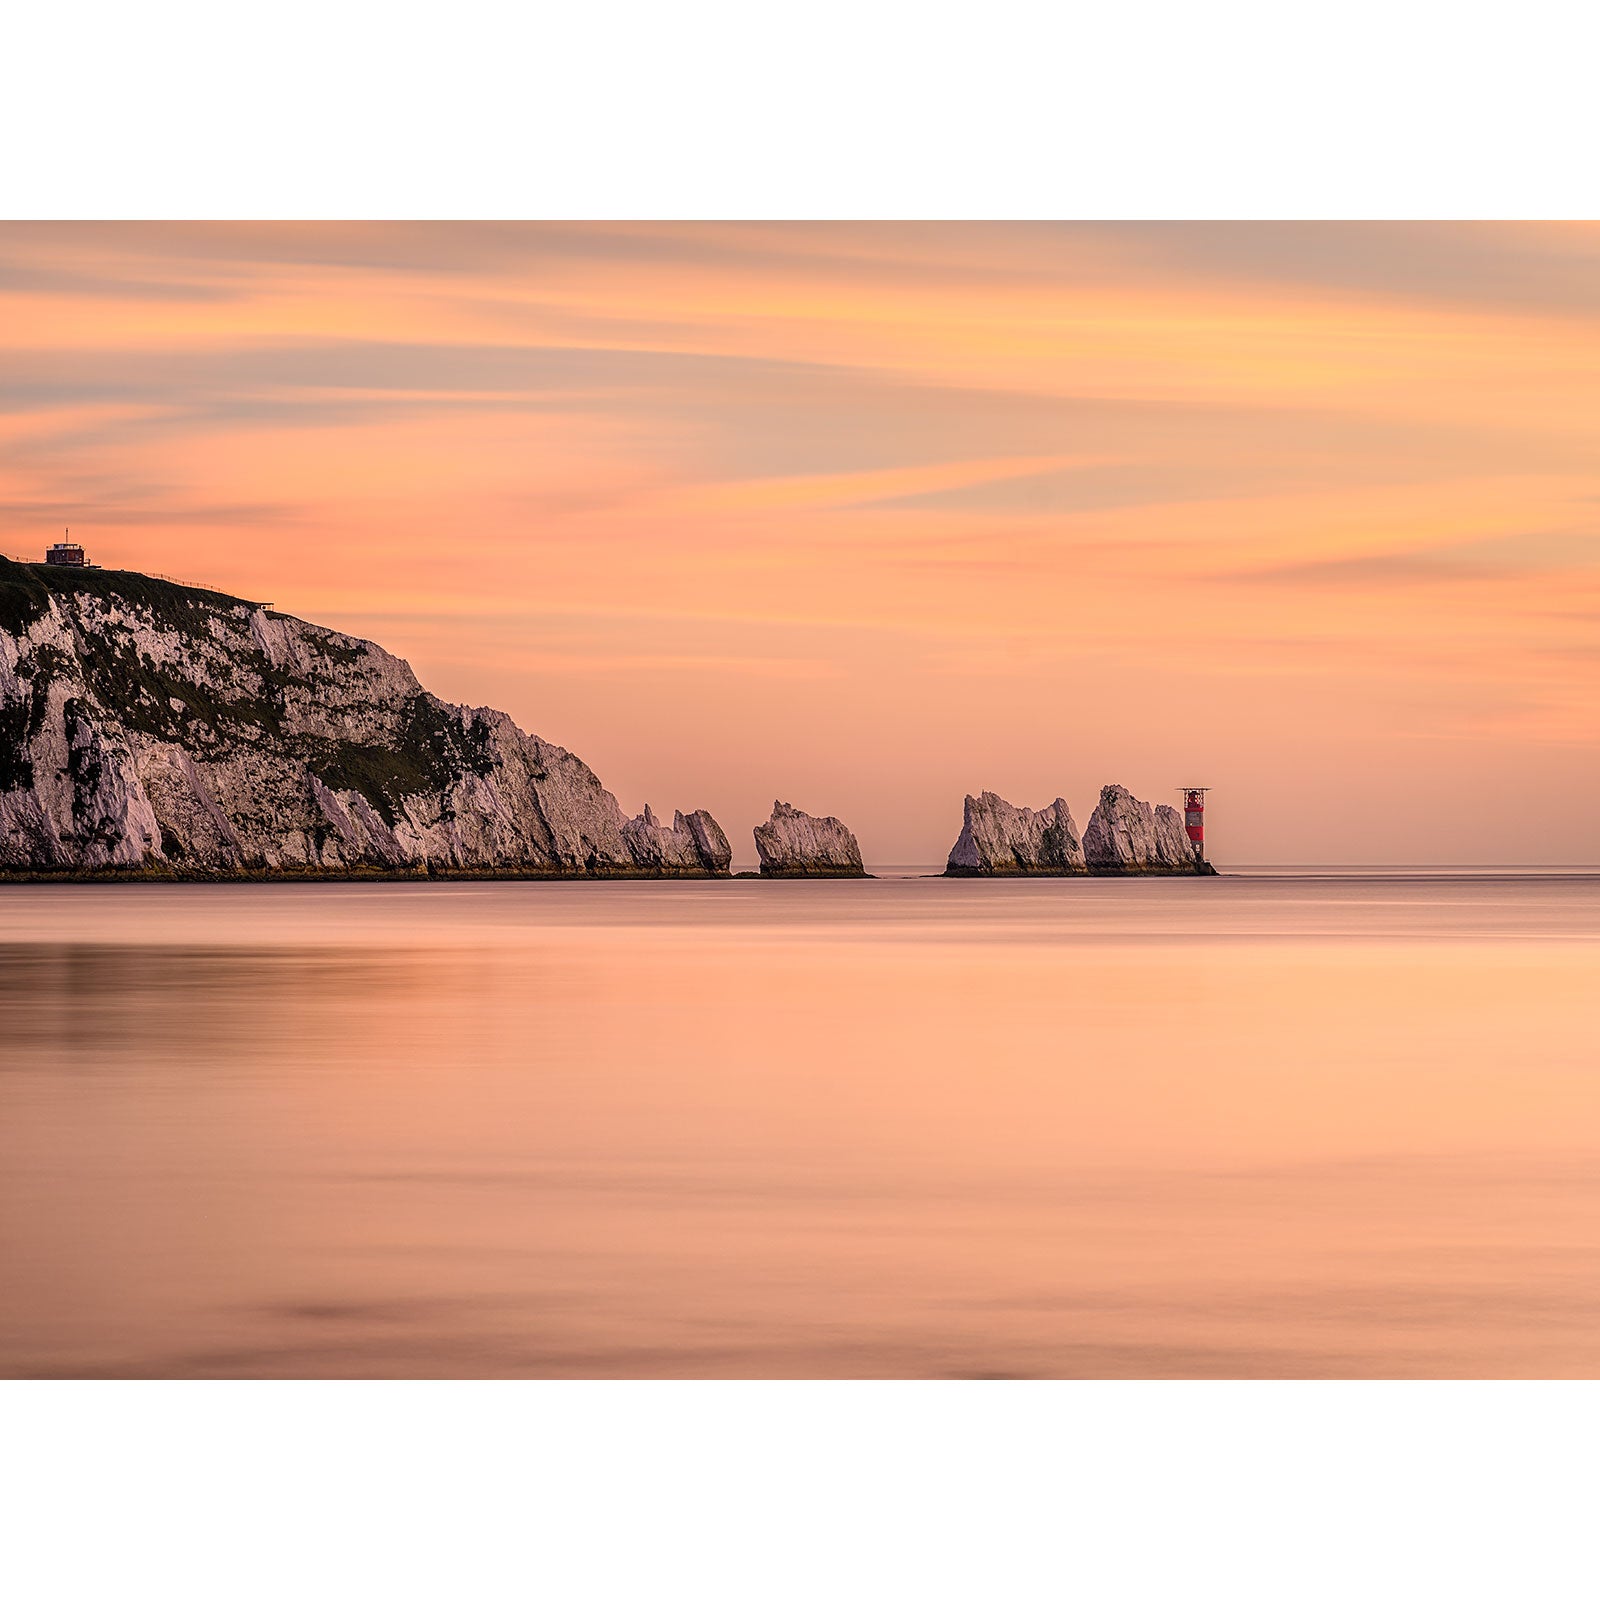 A serene sunset over a calm sea with a view of white chalk cliffs on the Isle of Wight and a distant lighthouse captured in "The Needles" by Available Light Photography.